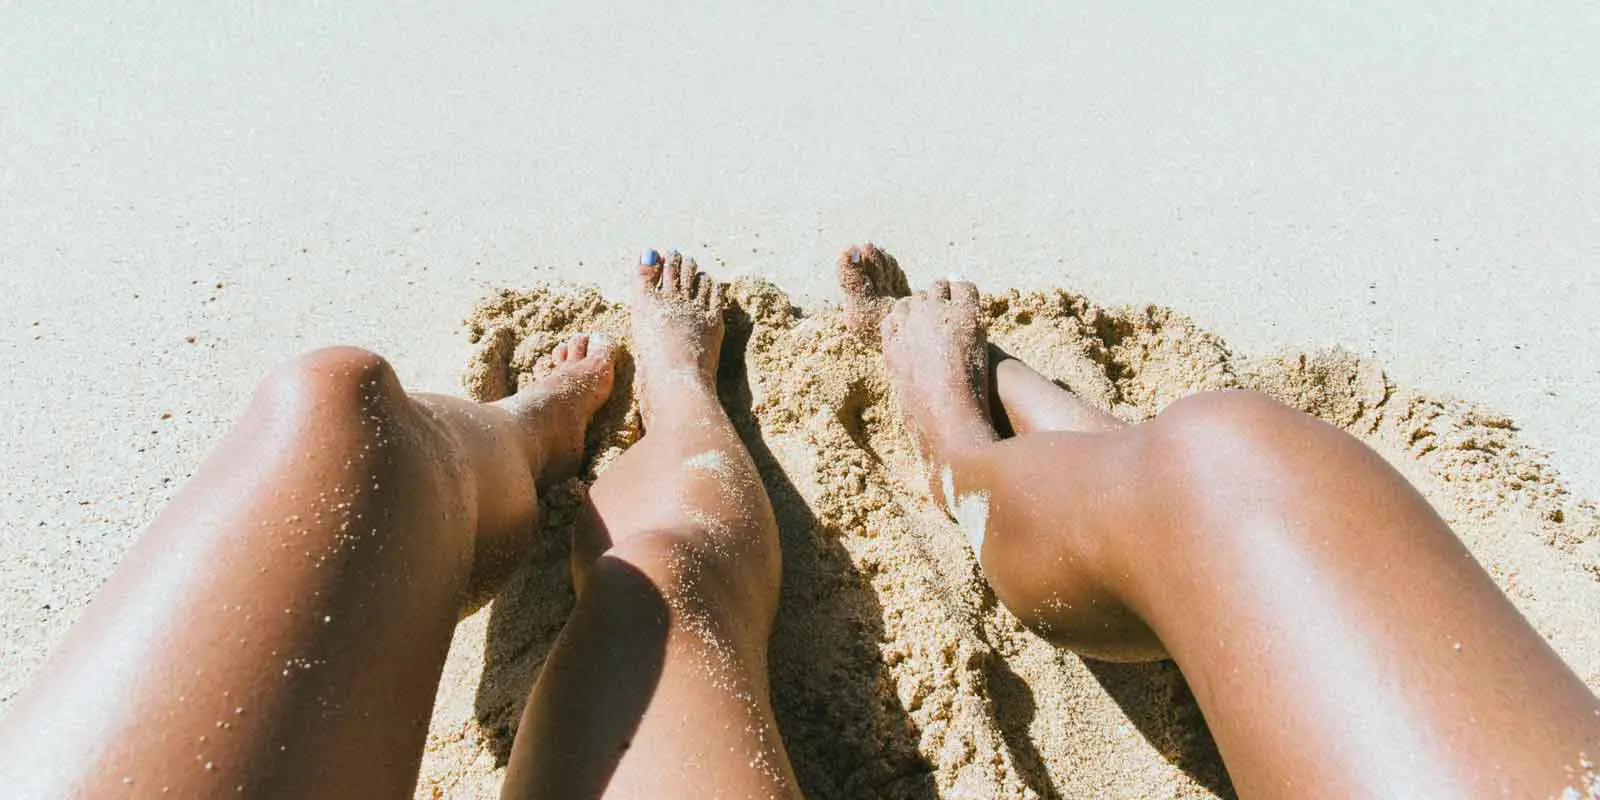 Two tanned legs outstretched on sand.